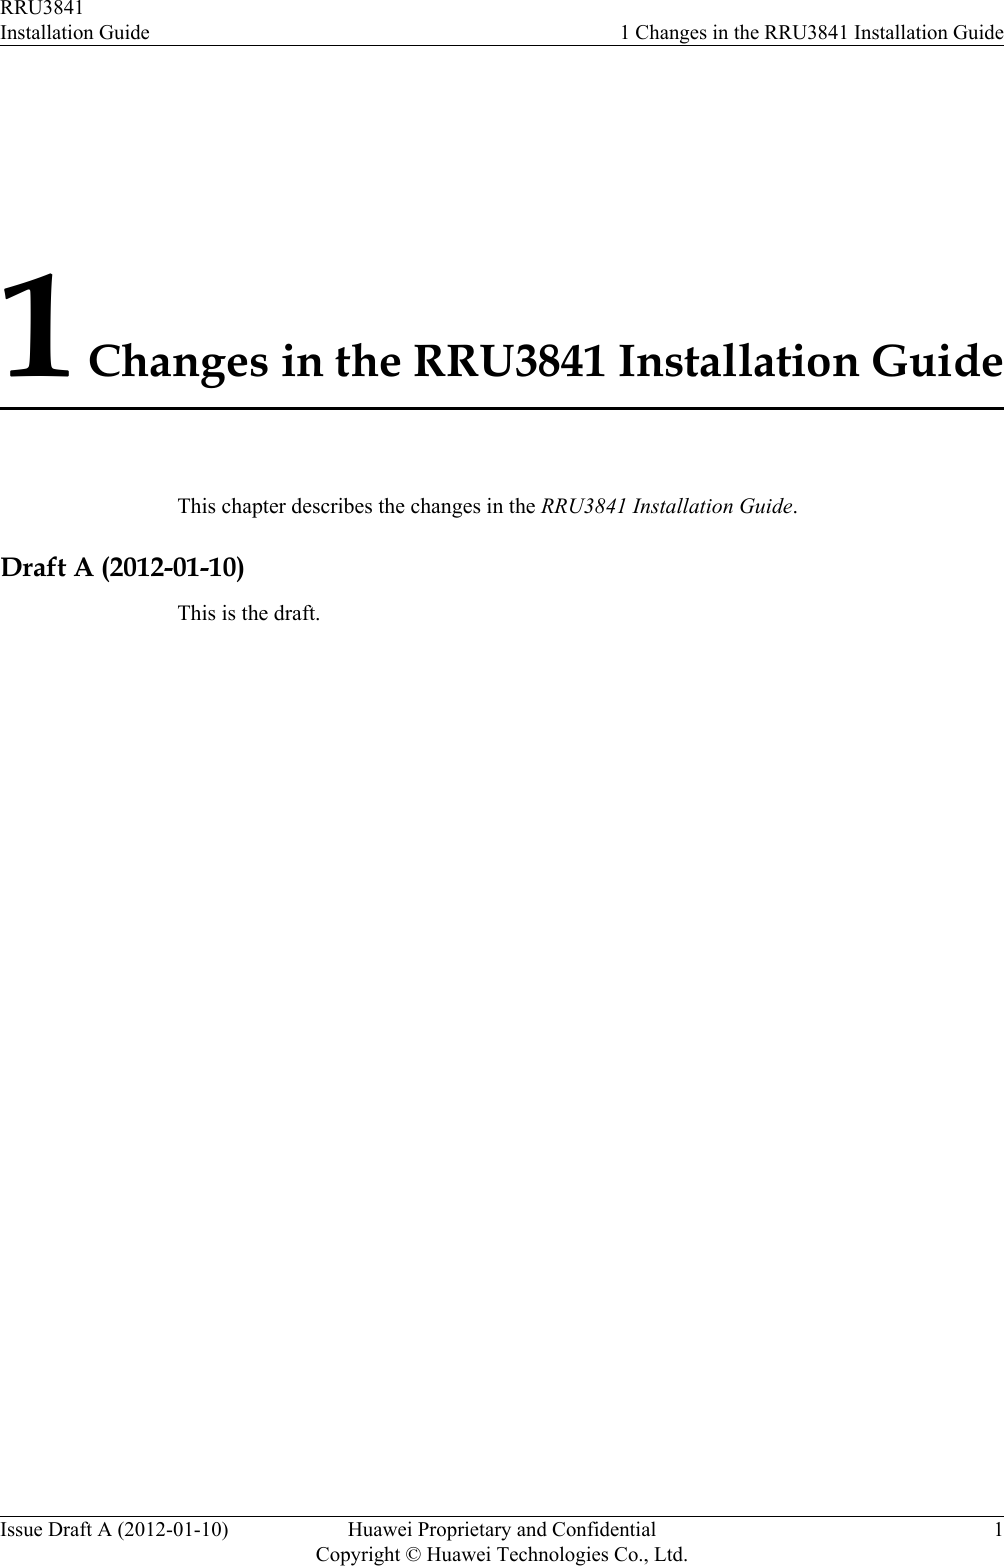 1 Changes in the RRU3841 Installation GuideThis chapter describes the changes in the RRU3841 Installation Guide.Draft A (2012-01-10)This is the draft.RRU3841Installation Guide 1 Changes in the RRU3841 Installation GuideIssue Draft A (2012-01-10) Huawei Proprietary and ConfidentialCopyright © Huawei Technologies Co., Ltd.1